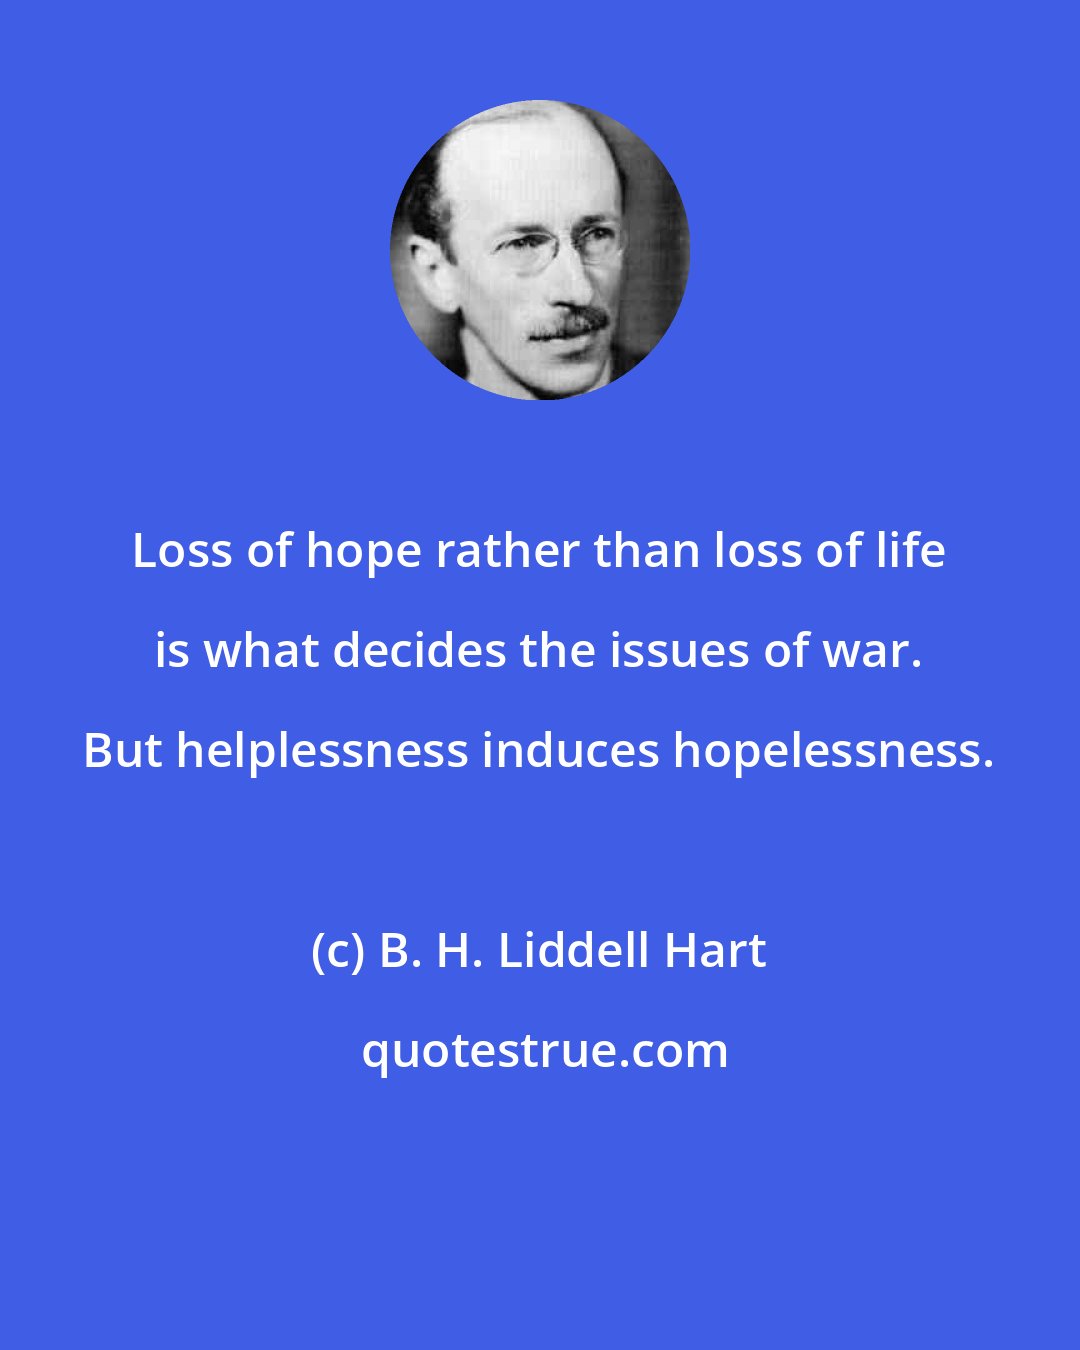 B. H. Liddell Hart: Loss of hope rather than loss of life is what decides the issues of war. But helplessness induces hopelessness.